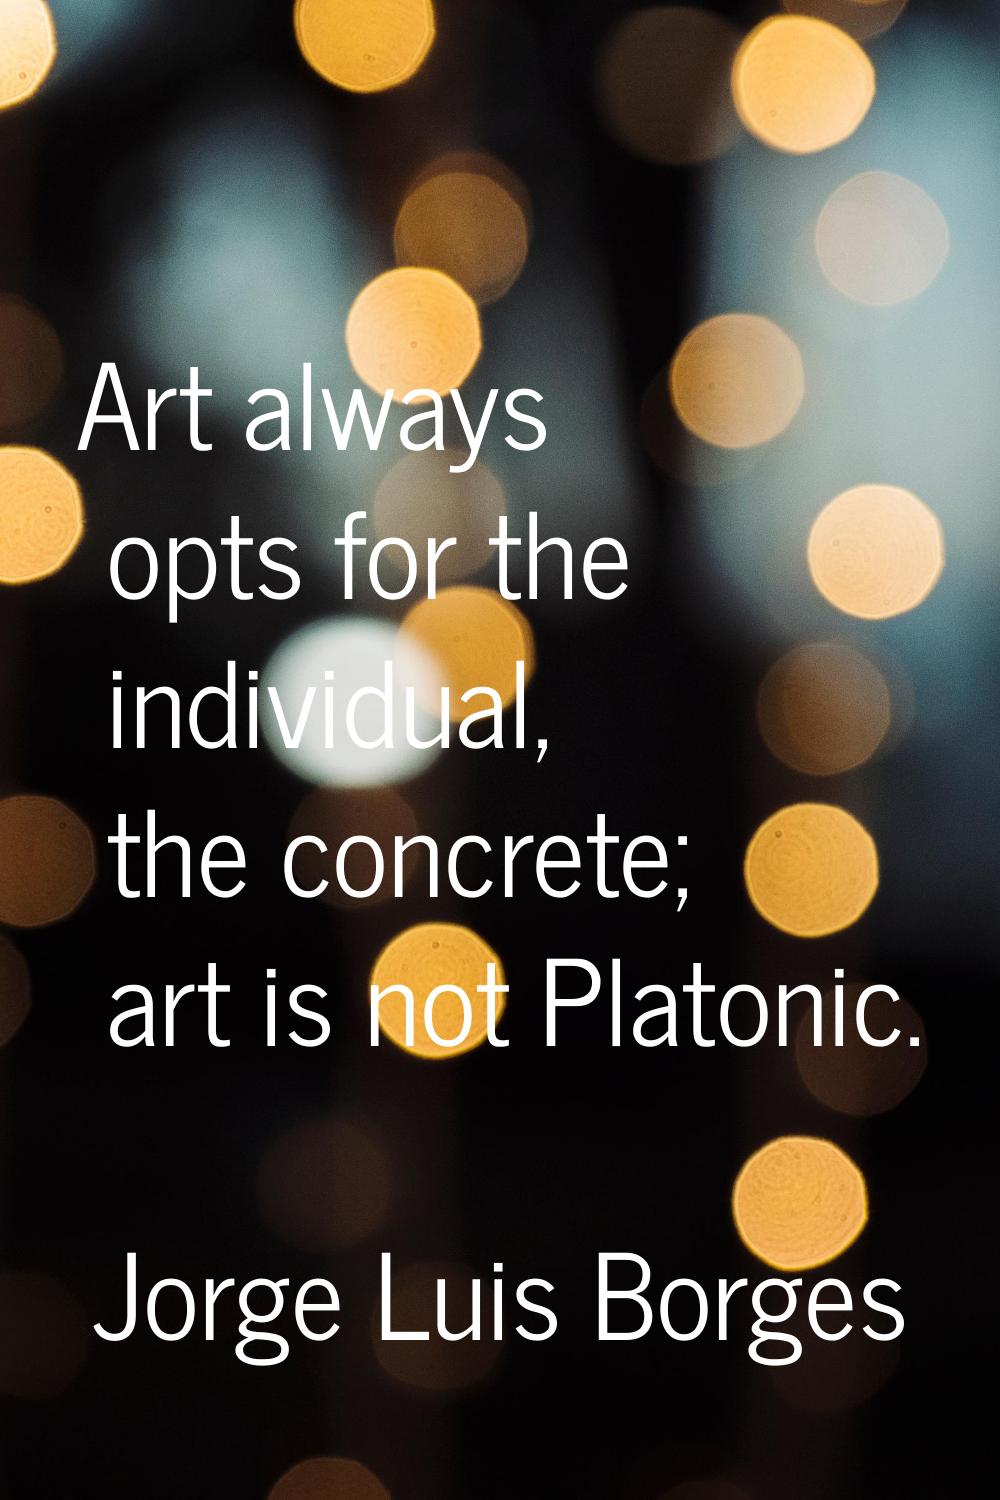 Art always opts for the individual, the concrete; art is not Platonic.